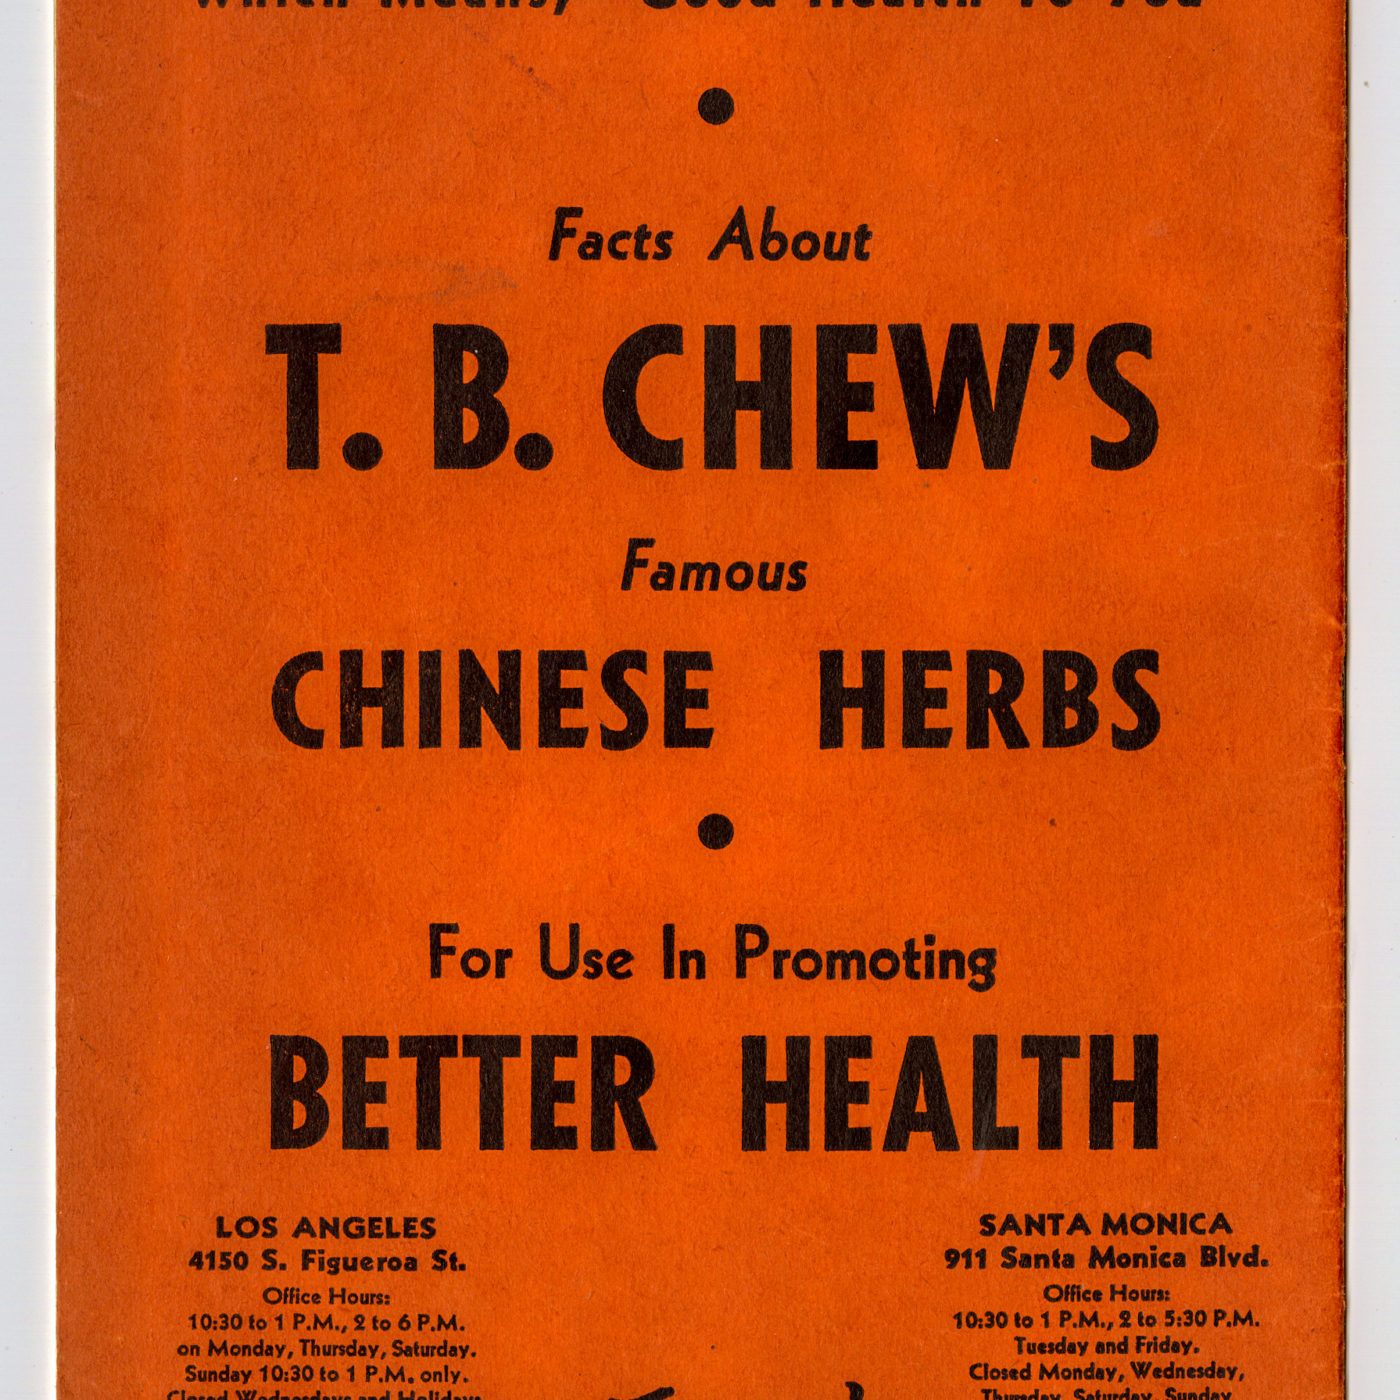 Facts About T.B. Chew's Famous Chinese Herbs Pamplet, pgs 34-35. Courtesy of Roy Delbyck, Museum of Chinese in America (MOCA) Collection.